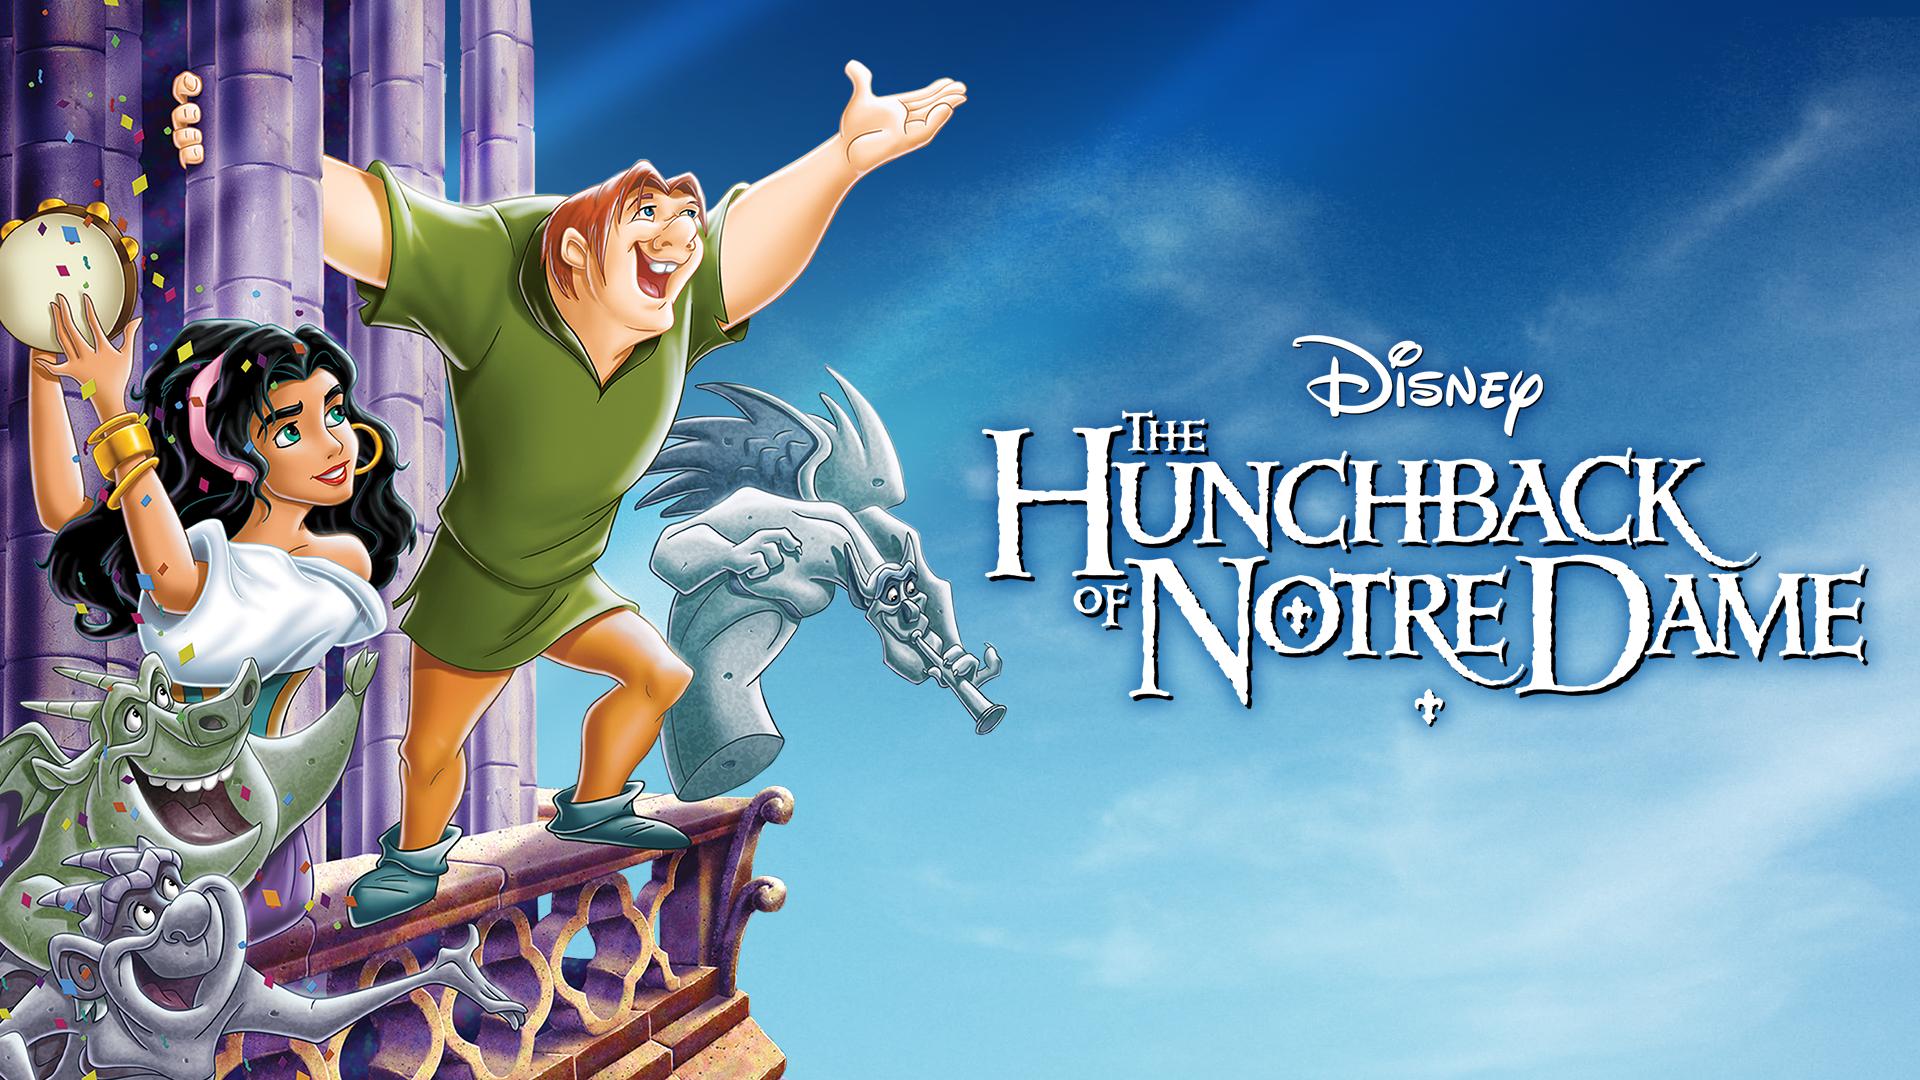 20 Weeks of Disney Animation: ‘The Hunchback of Notre Dame’